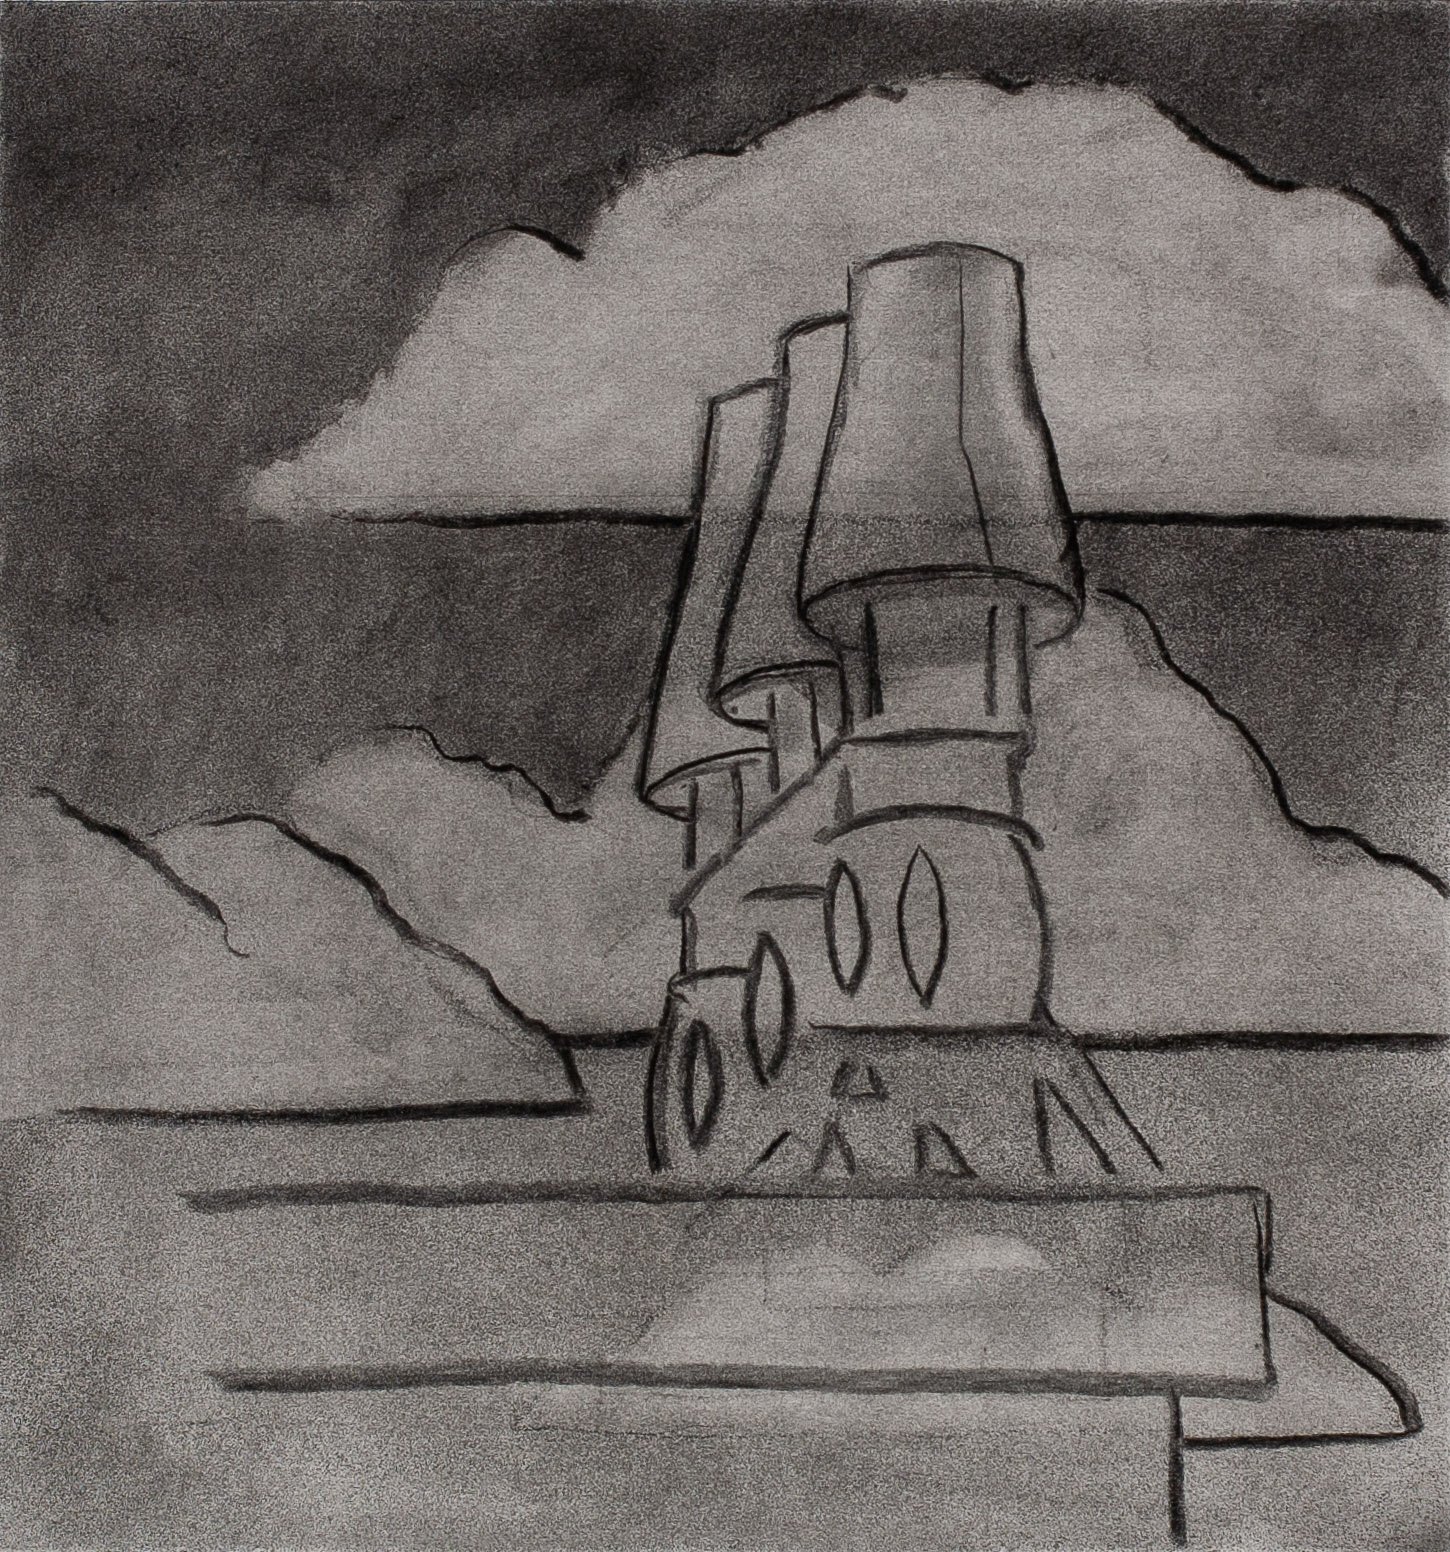   Vent   Charcoal on paper  16 X 15 inches  2023   